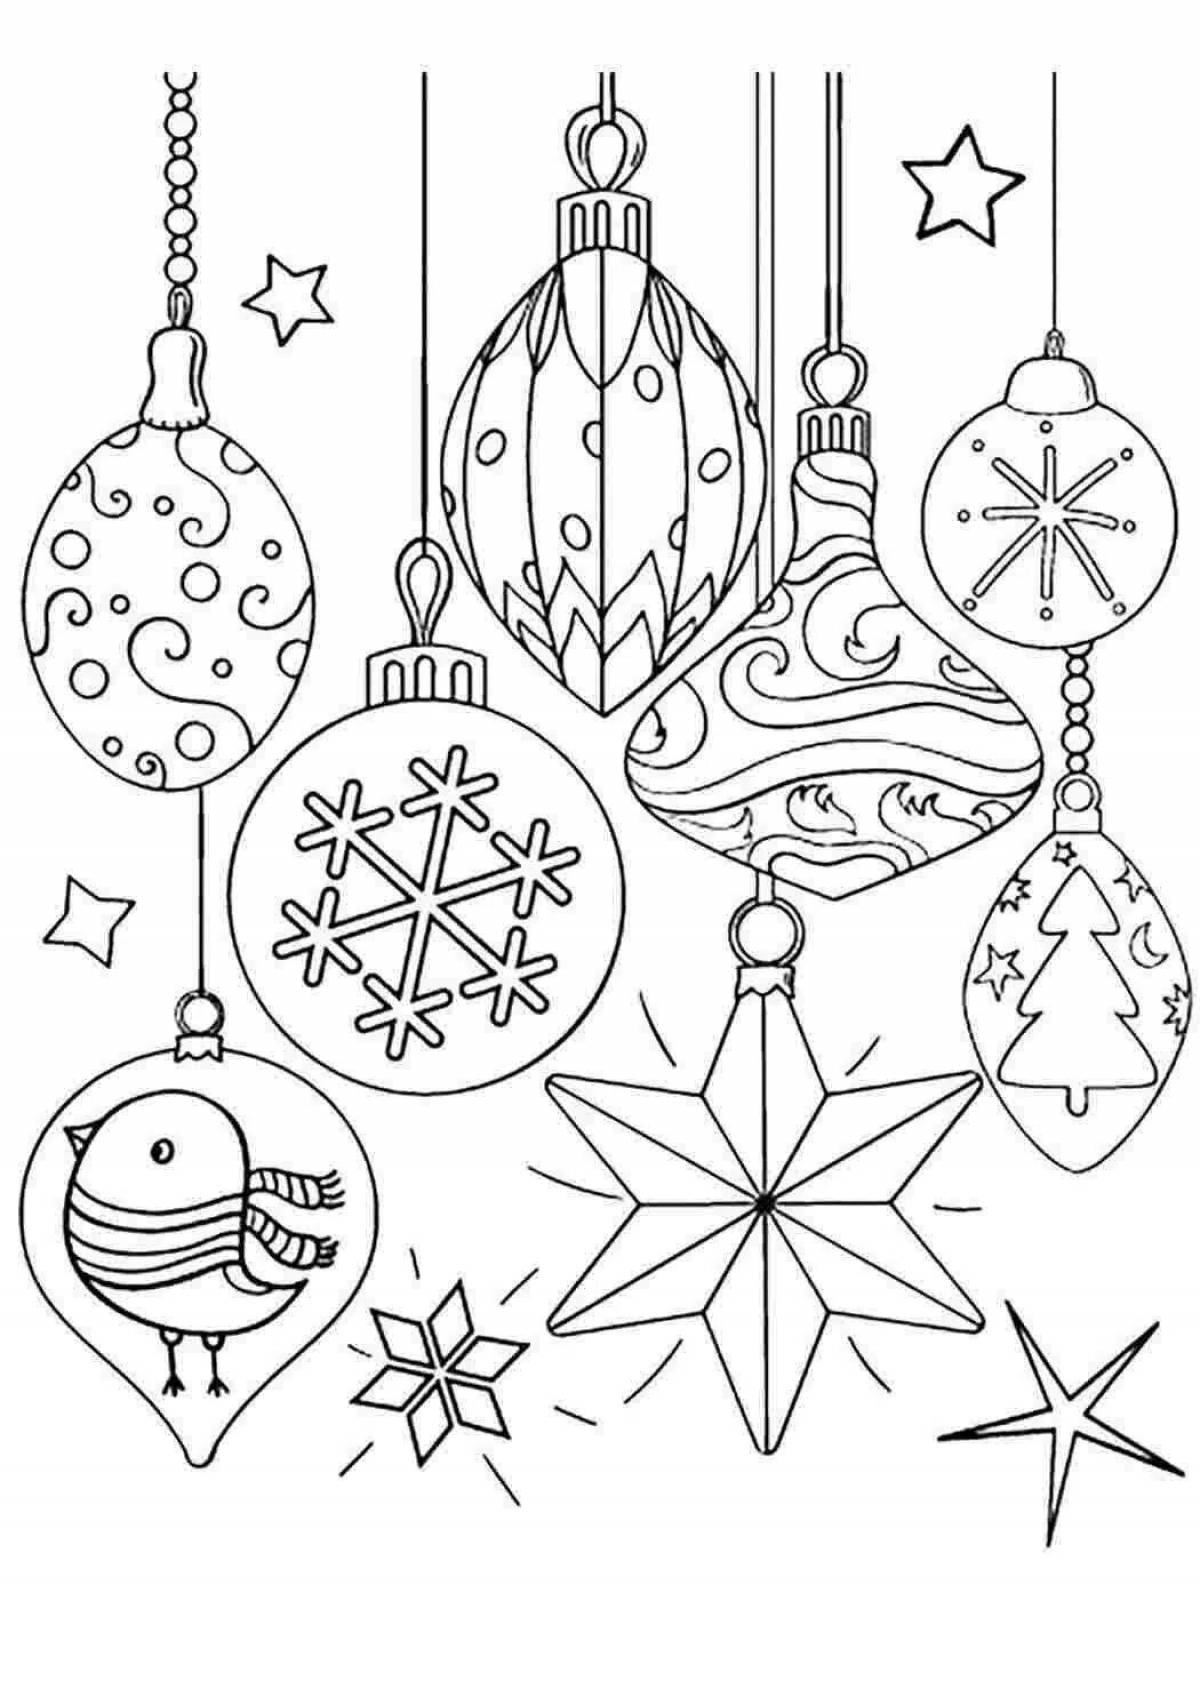 Festive Christmas coloring toy